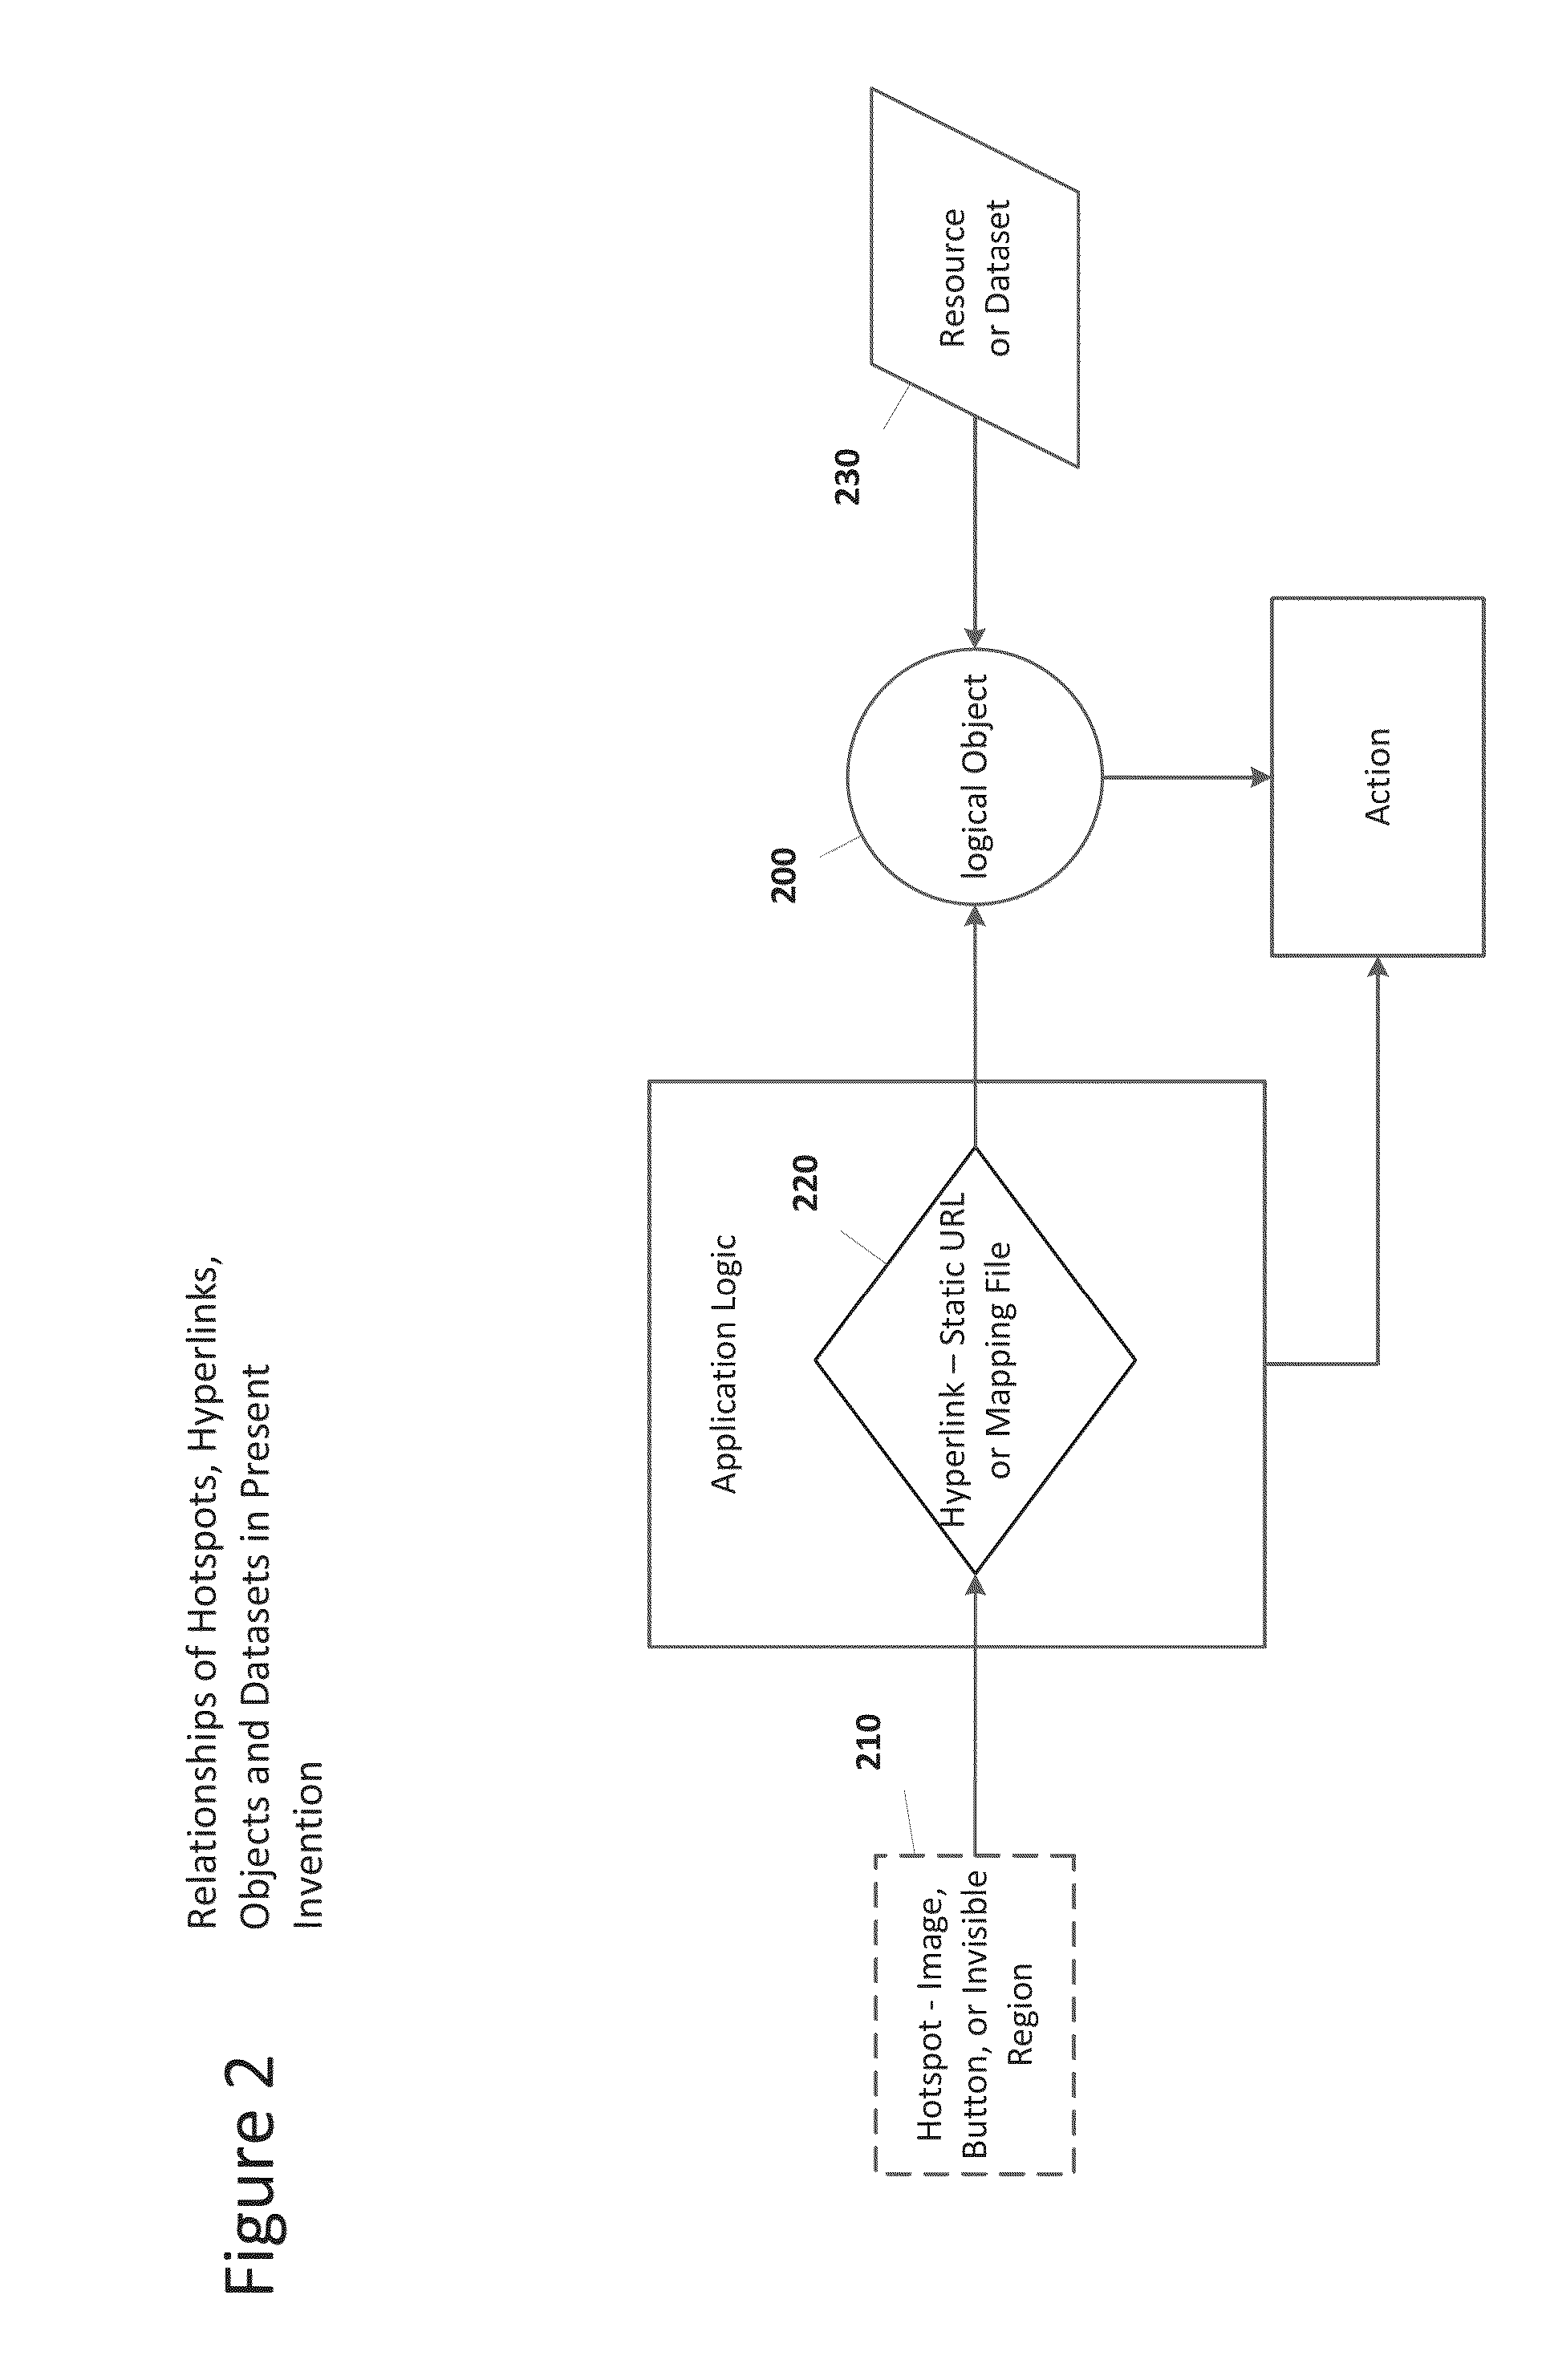 System and method for generating and using spatial and temporal metadata